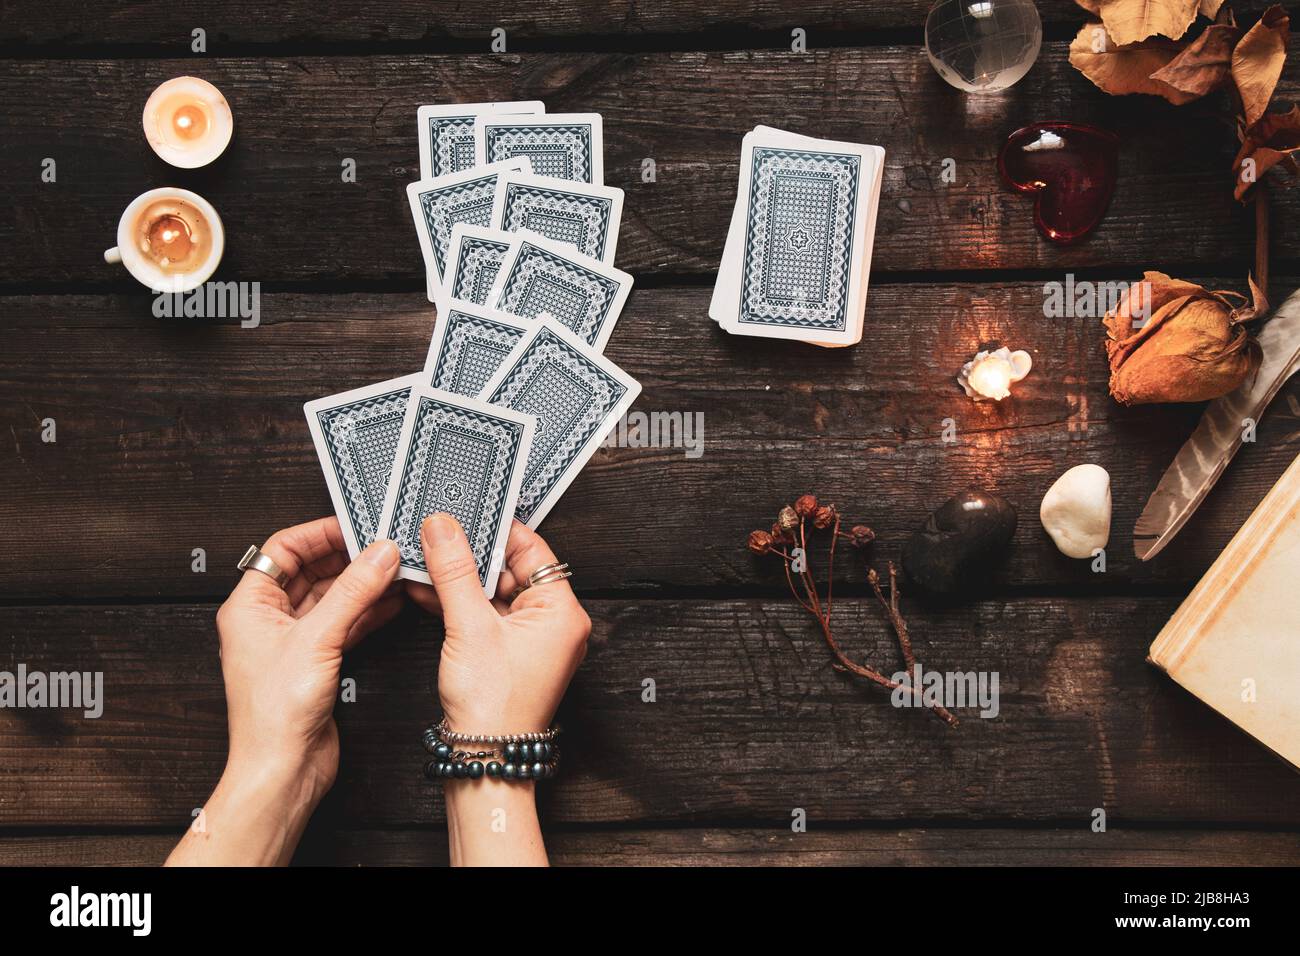 tarot fortune teller, magic and the occult, occult sciences, divination and predictions, witch Stock Photo